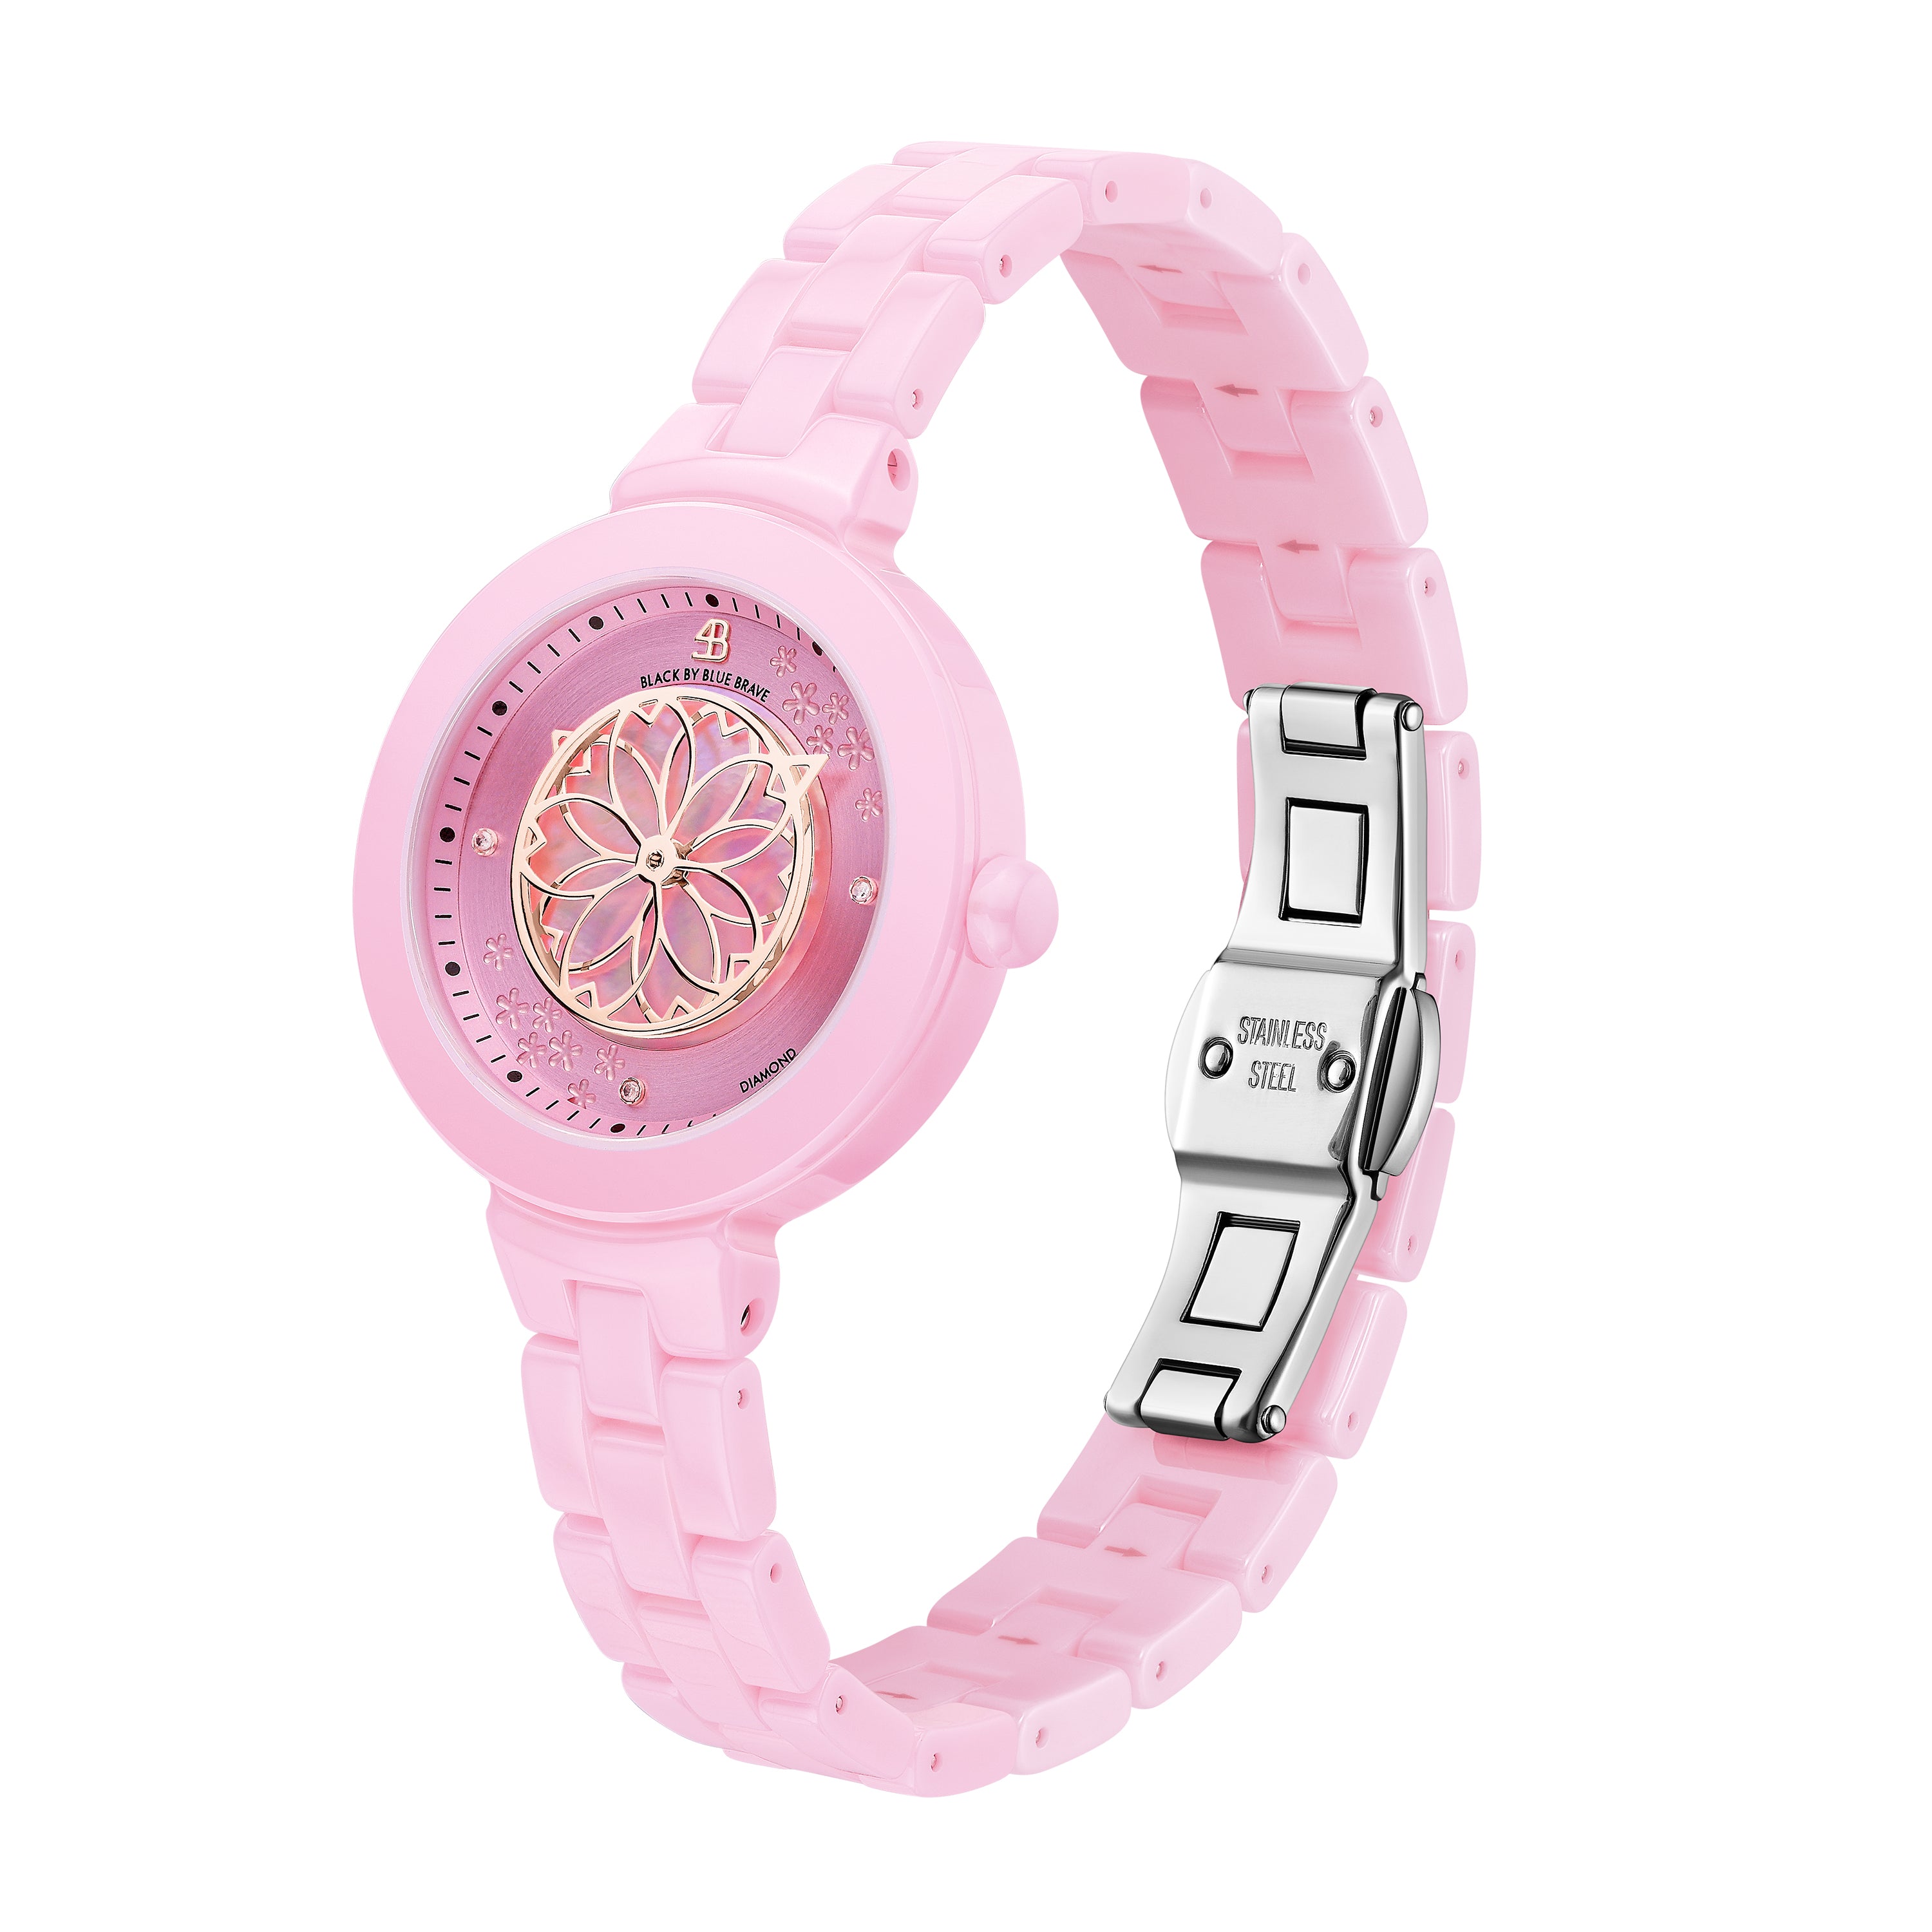 Pink Diamond Cherry Blossom Ceramic Watch With Flower Ceramic Jewelleries (Earrings, Necklace and Bracelet)